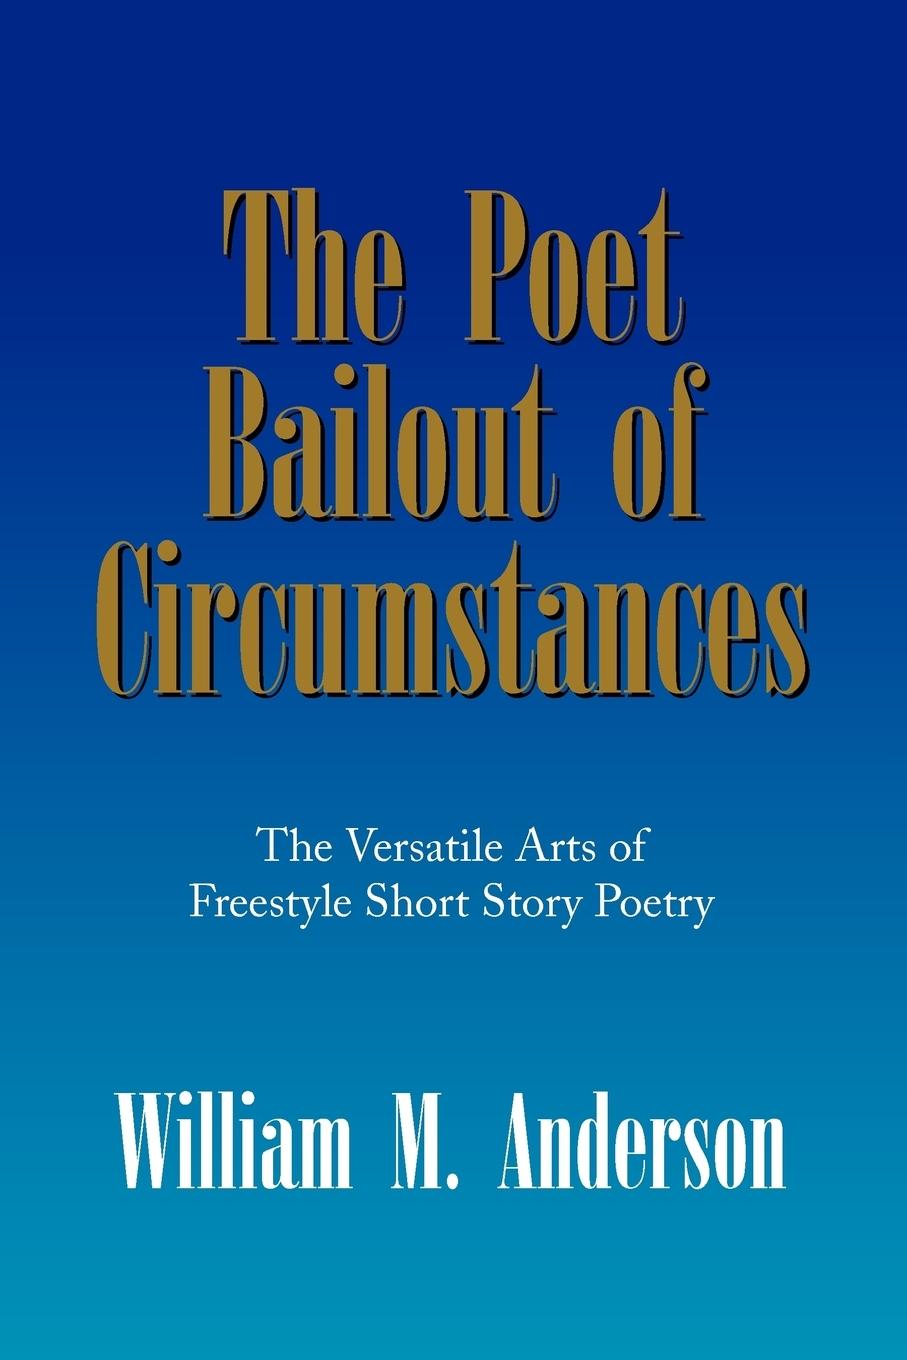 The Poet Bailout of Circumstances - Anderson, William M.